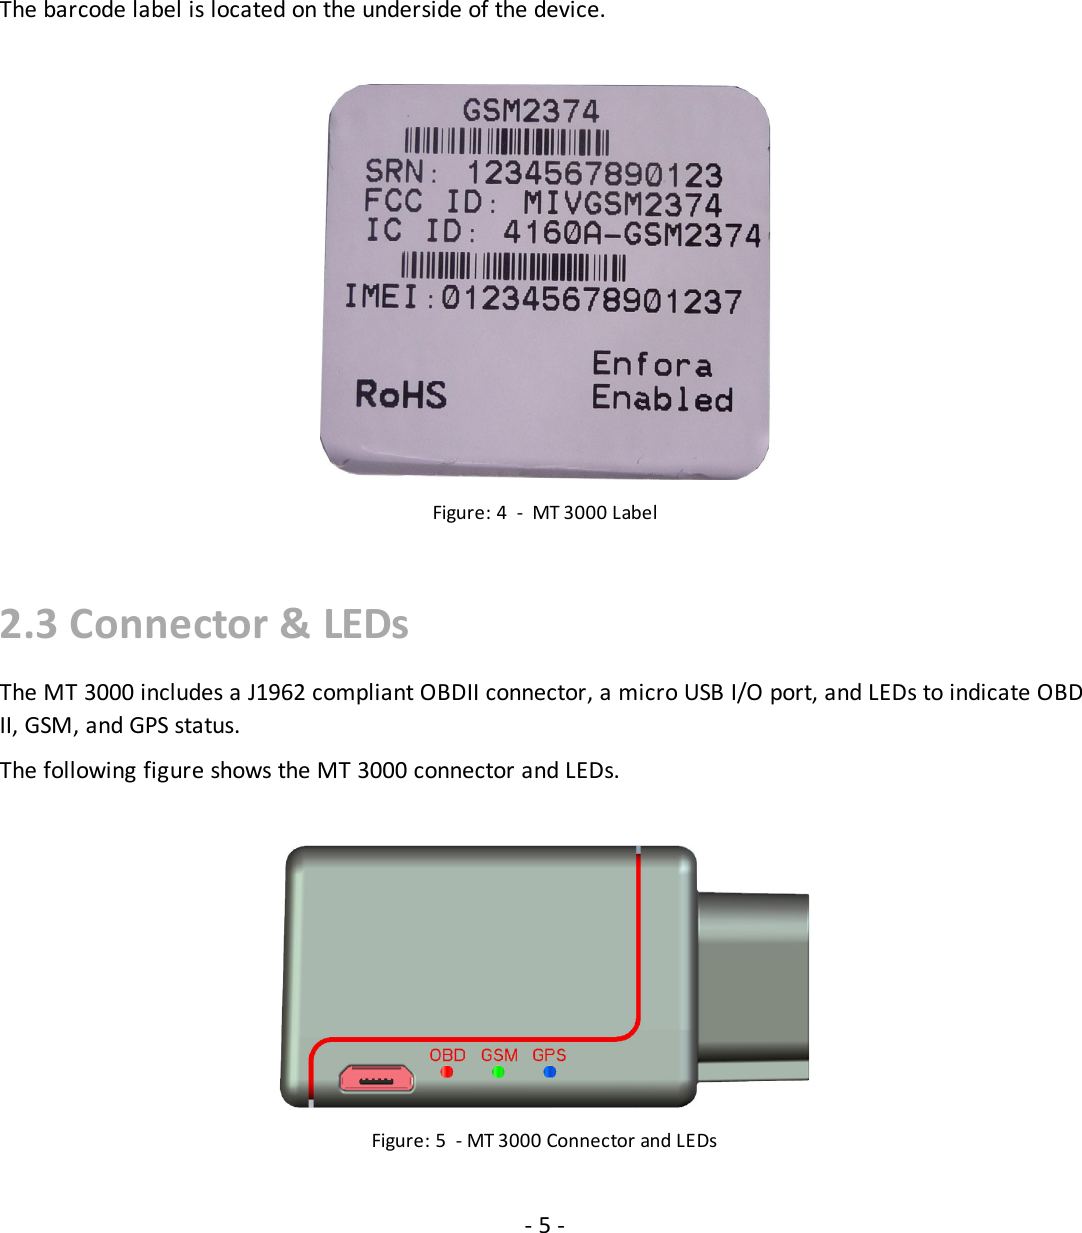 2.2 Barcode LabelThe barcode label is located on the underside of the device.Figure: 4 - MT 3000 Label2.3 Connector &amp; LEDsThe MT 3000 includes a J1962 compliant OBDII connector, a micro USB I/O port, and LEDs to indicate OBDII, GSM, and GPS status.The following figure shows the MT 3000 connector and LEDs.Figure: 5 - MT 3000 Connector and LEDs-5-